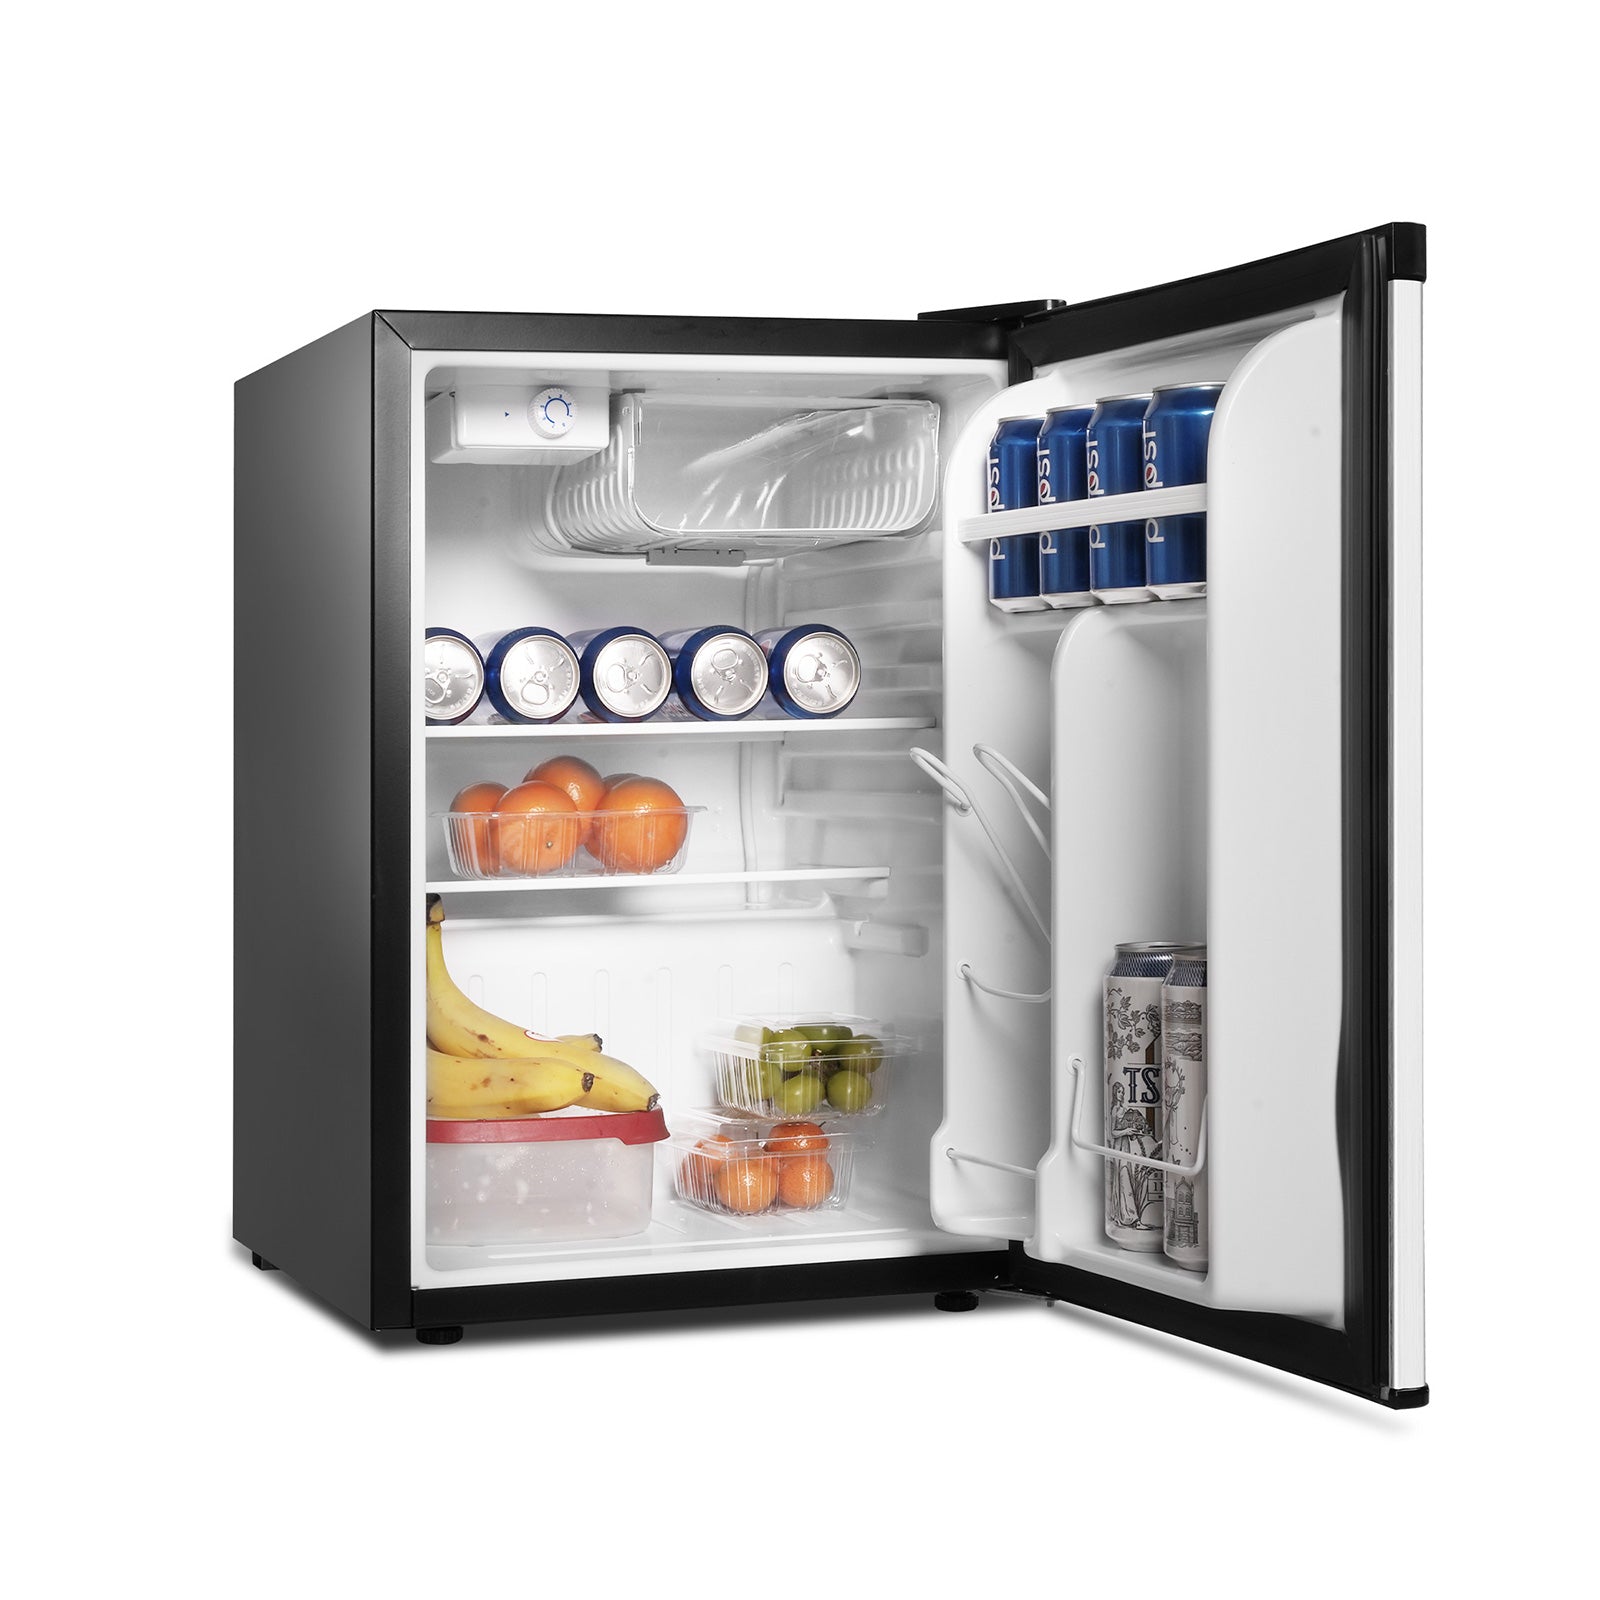 Luckyermore 2.6 Cu.Ft. Mini Fridge with Freezer Compact Refrigerator with Removable Shelf